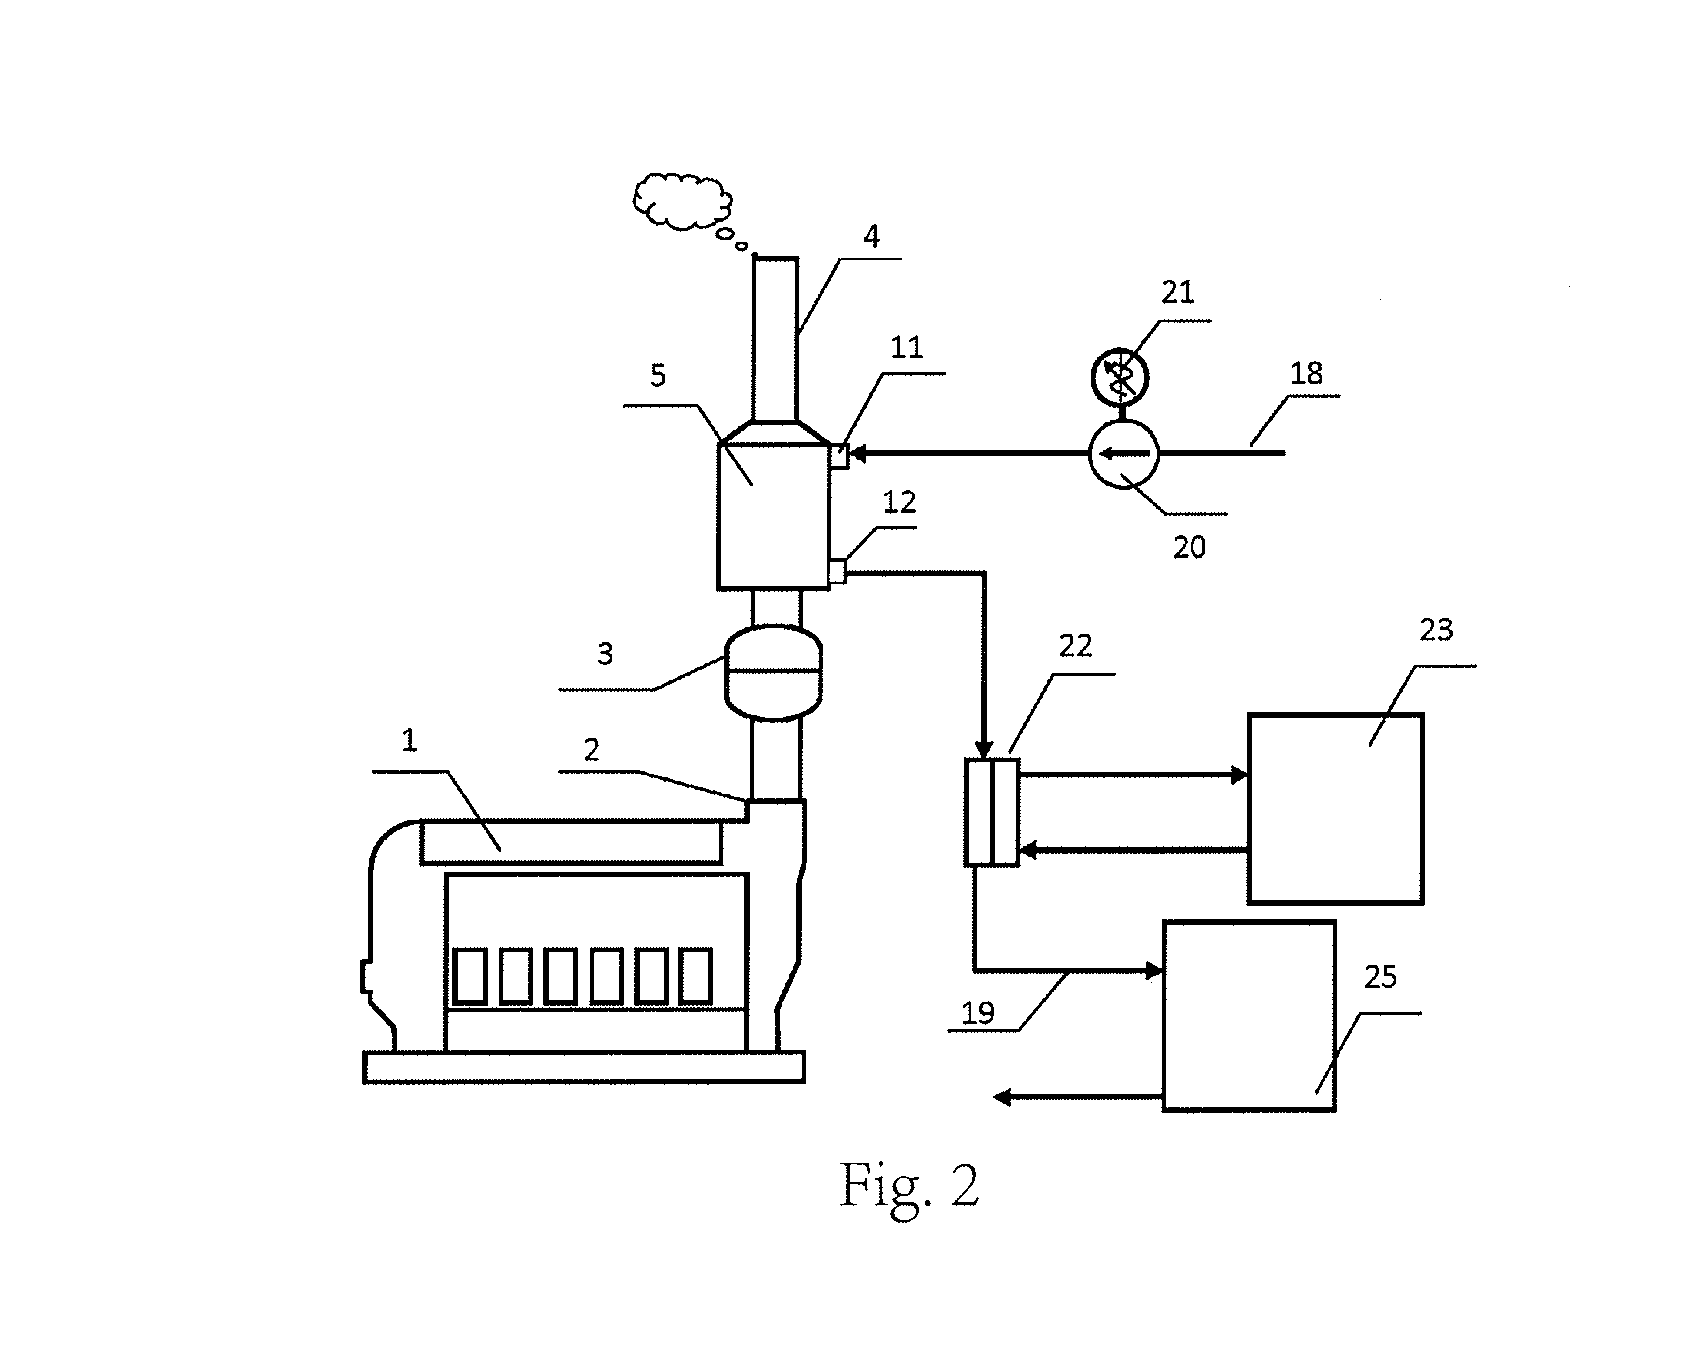 Method, apparatus, and system used for purifying and silencing exhaust of internal combustion engine